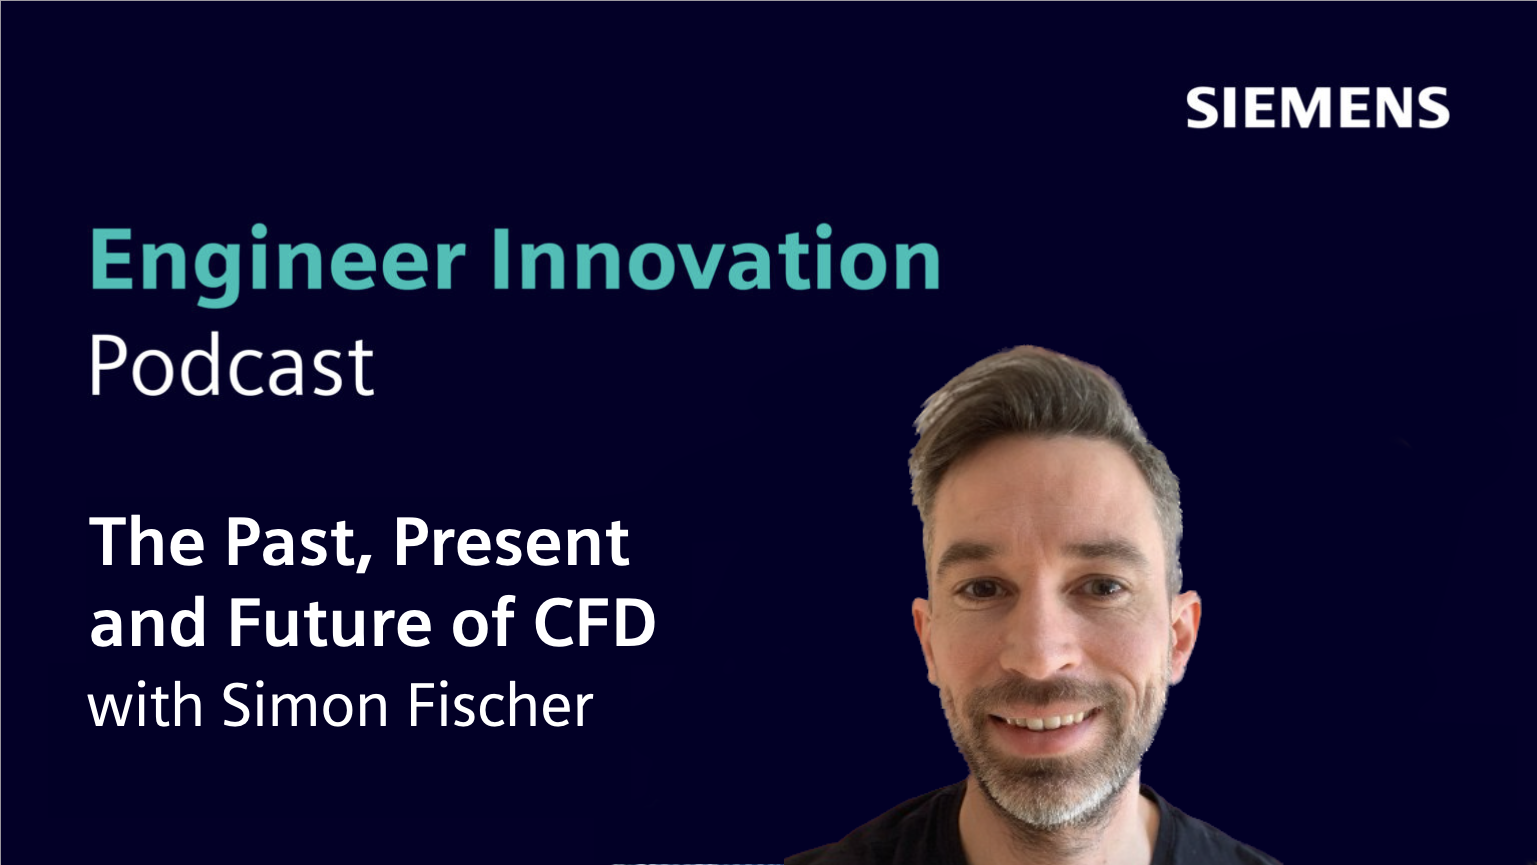 On today’s episode, we’re joined by reformed engine combustion simulation expert Dr Simon Fischer, who traded in a stable career in engine simulation to become an expert in storytelling through simulation